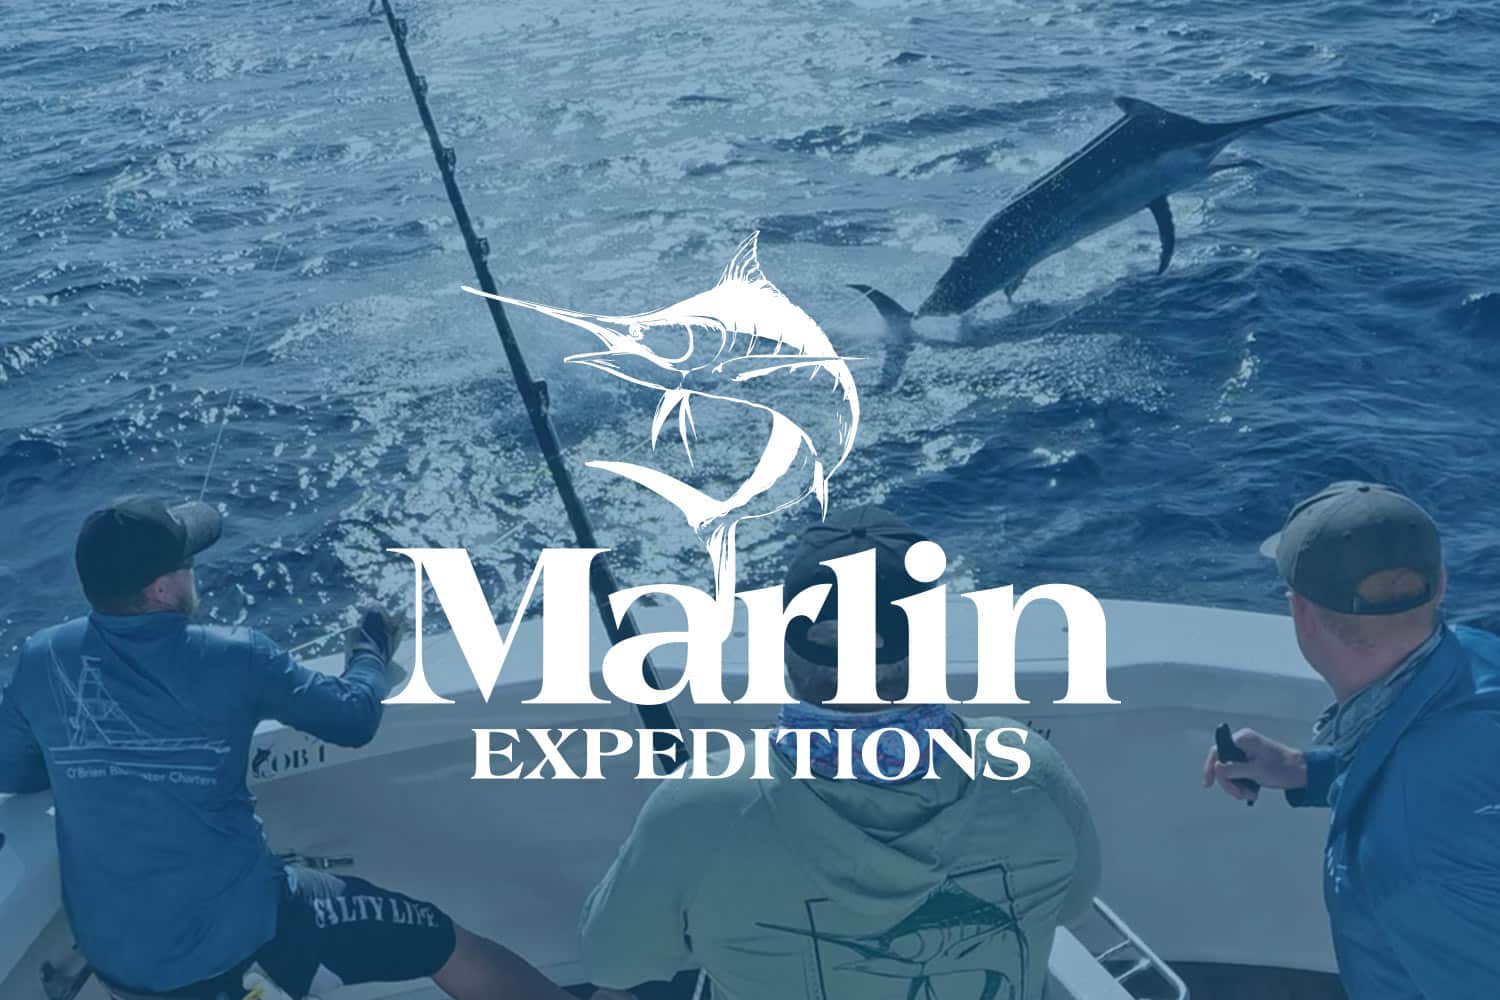 Marlin Expeditions logo in white overlaid a blue filter image of three anglers fishing for marlin.